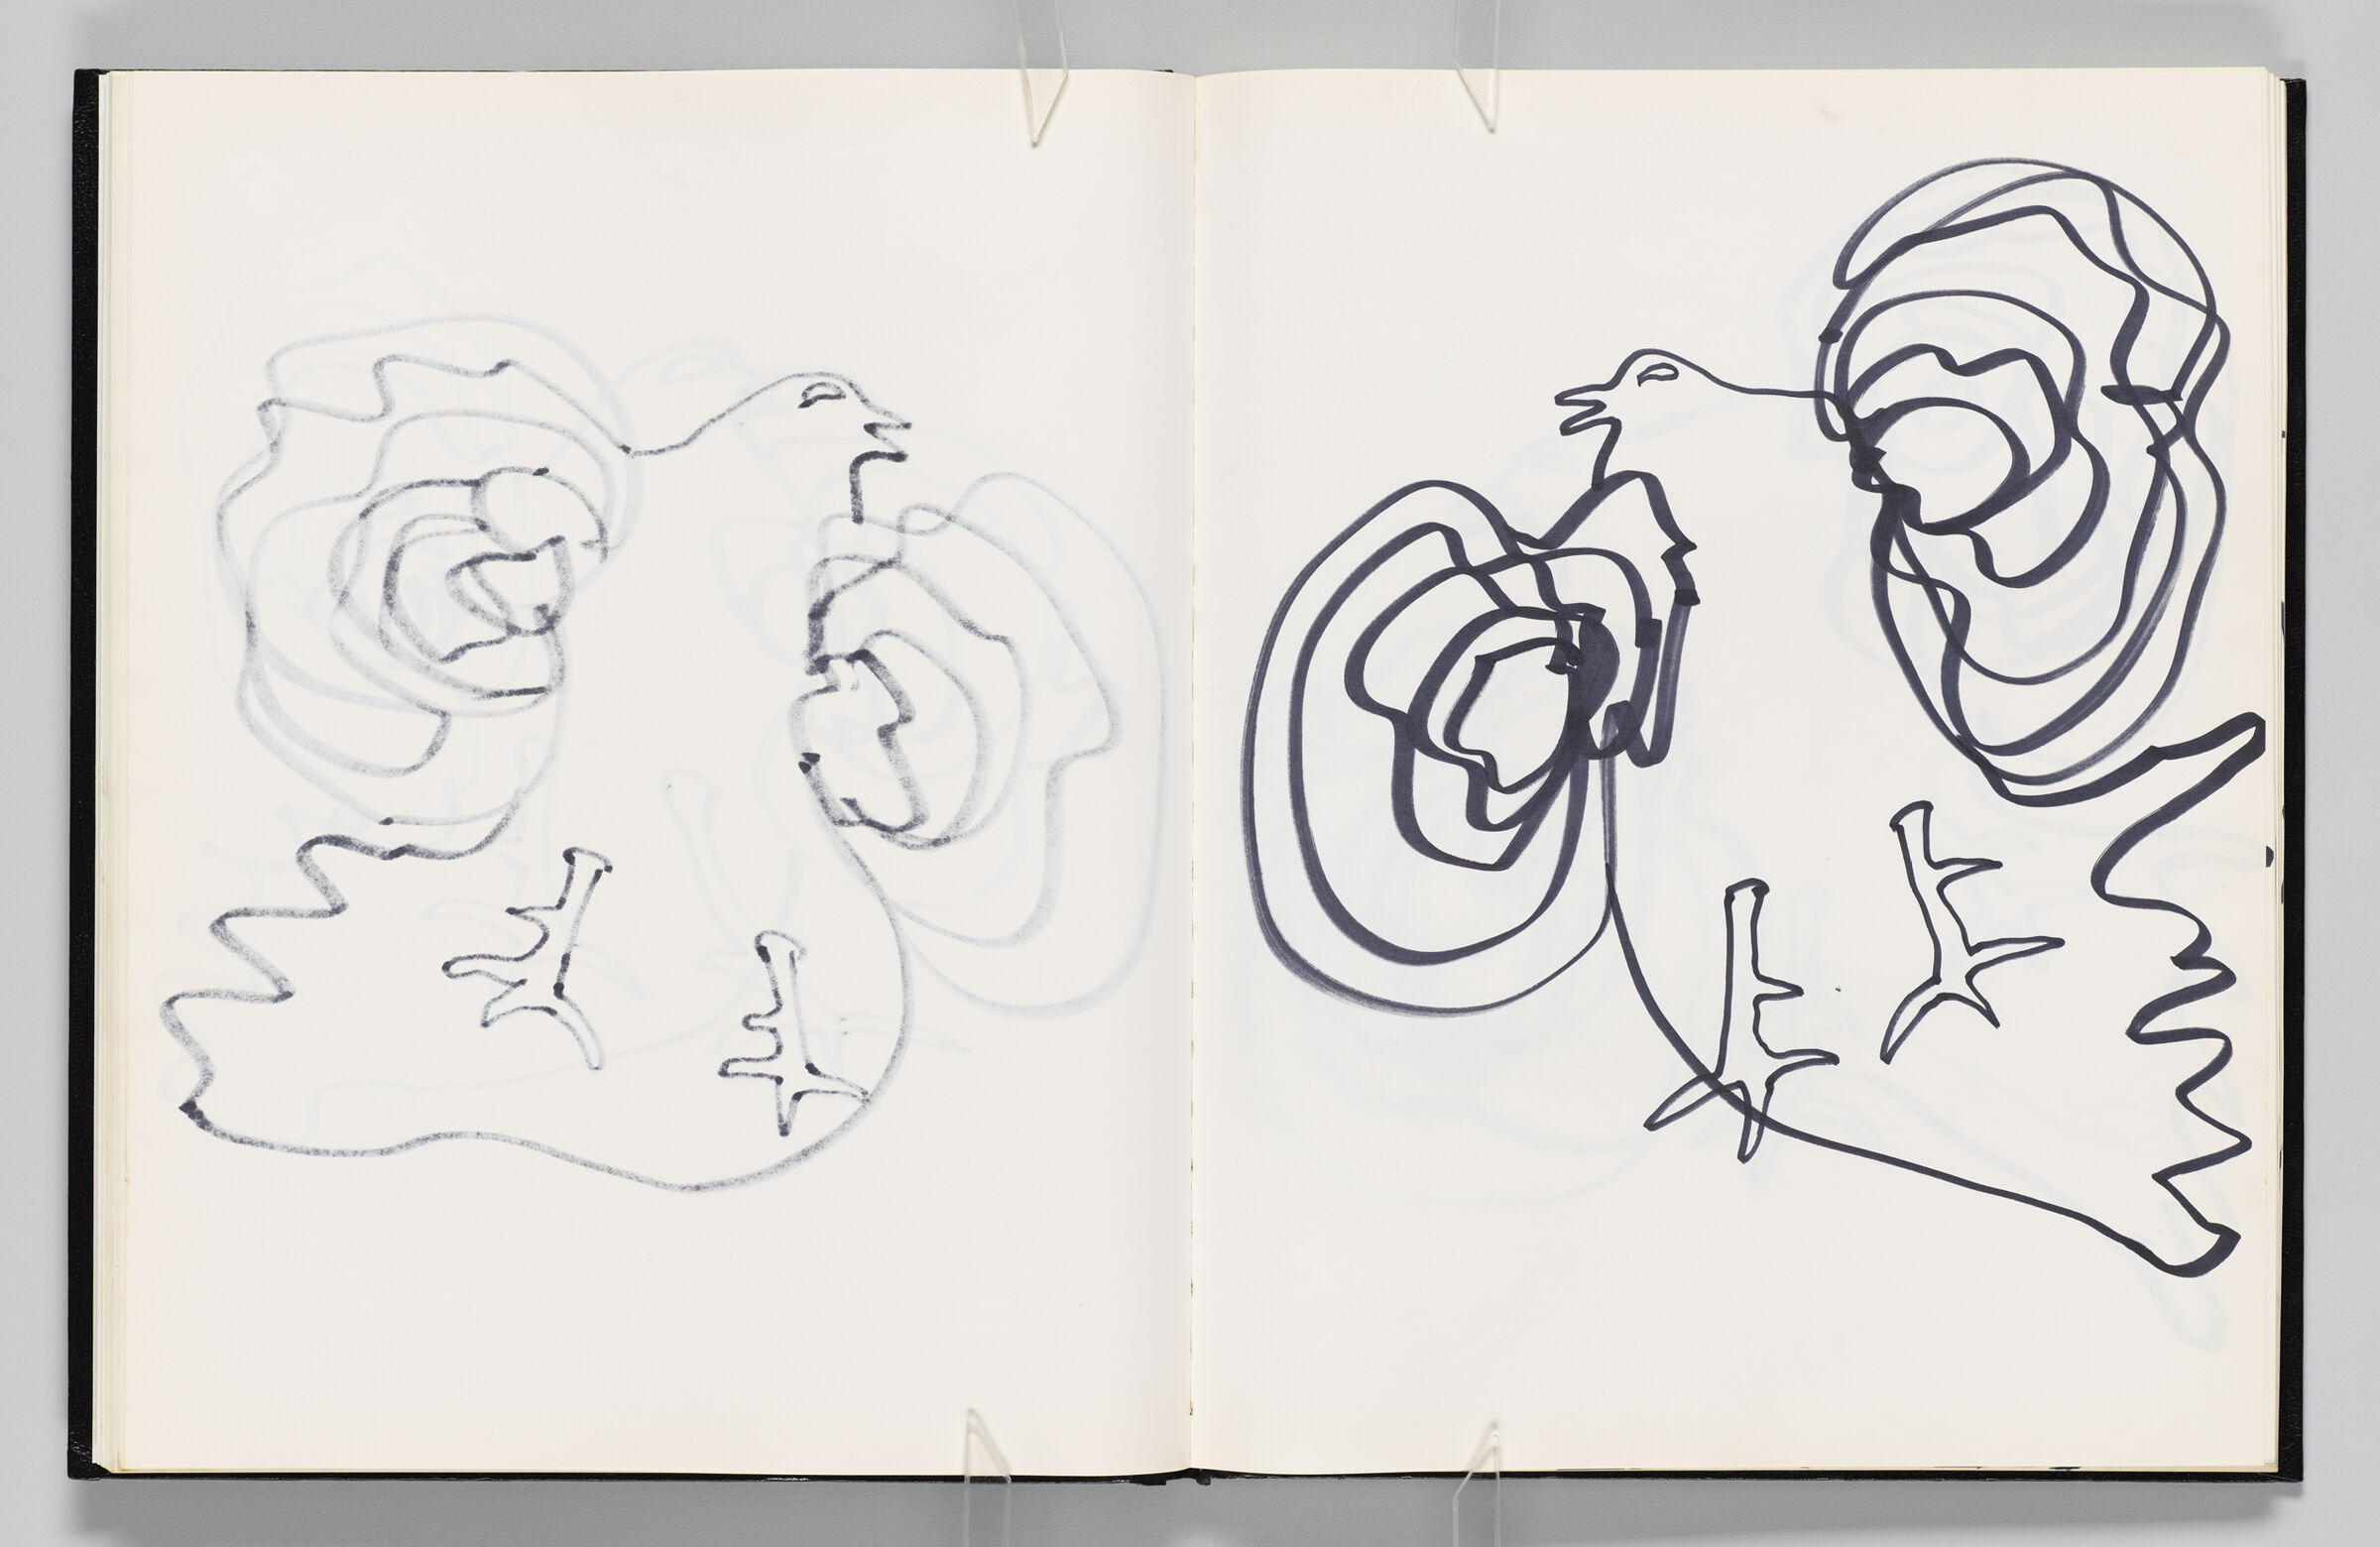 Untitled (Bleed-Through Of Previous Page, Left Page); Untitled (Bird, Right Page)